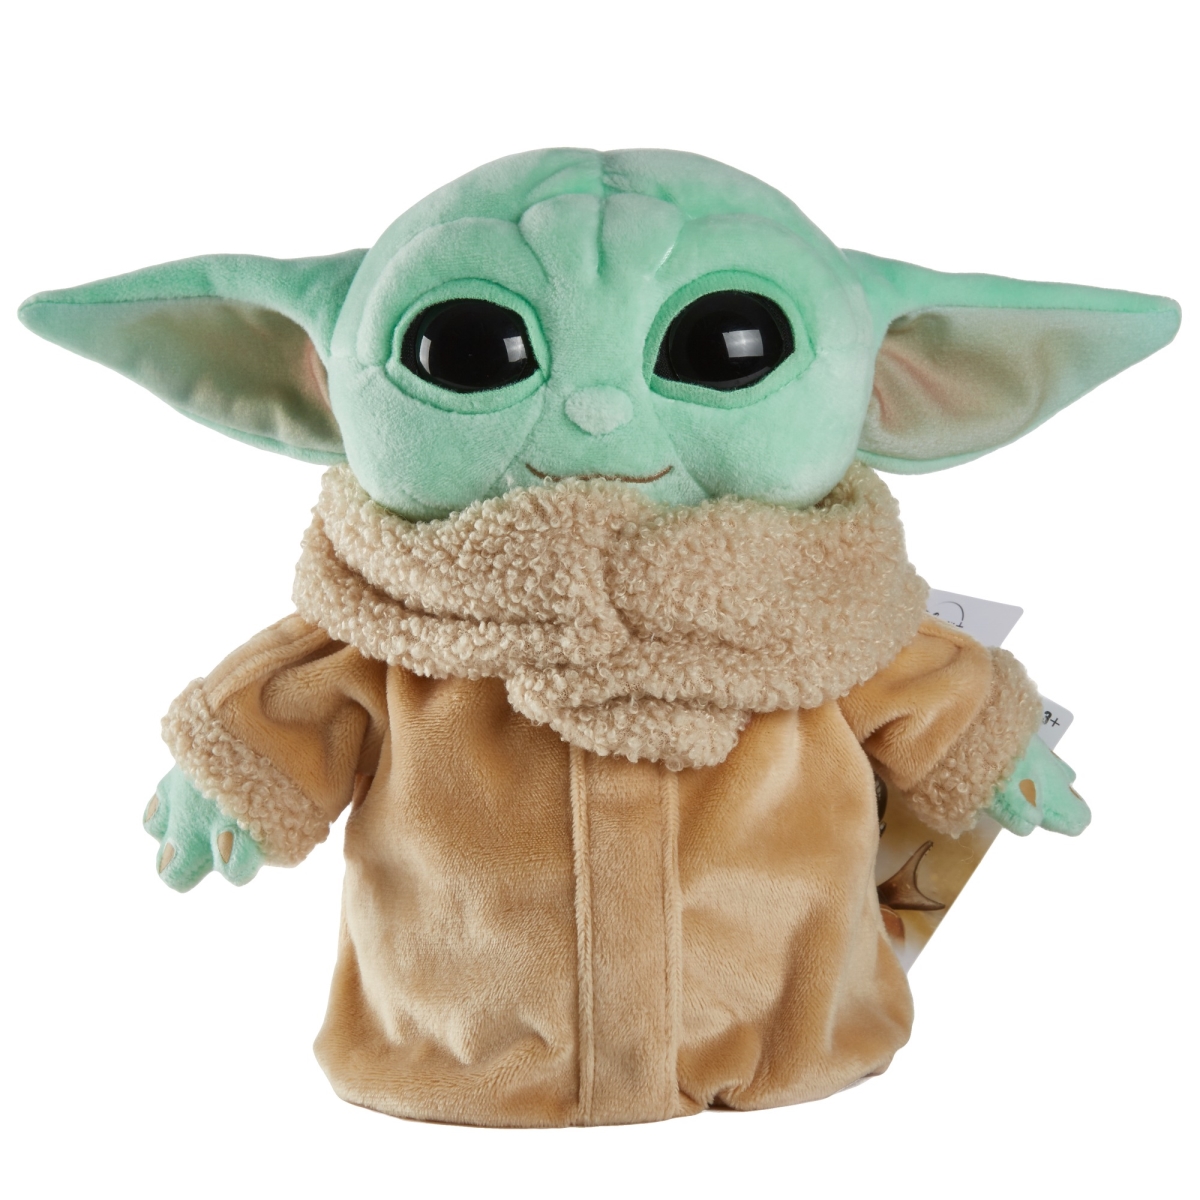 Picture of Mattel 30377480 8 in. Star Wars Basic Plush The Child Toy, Green